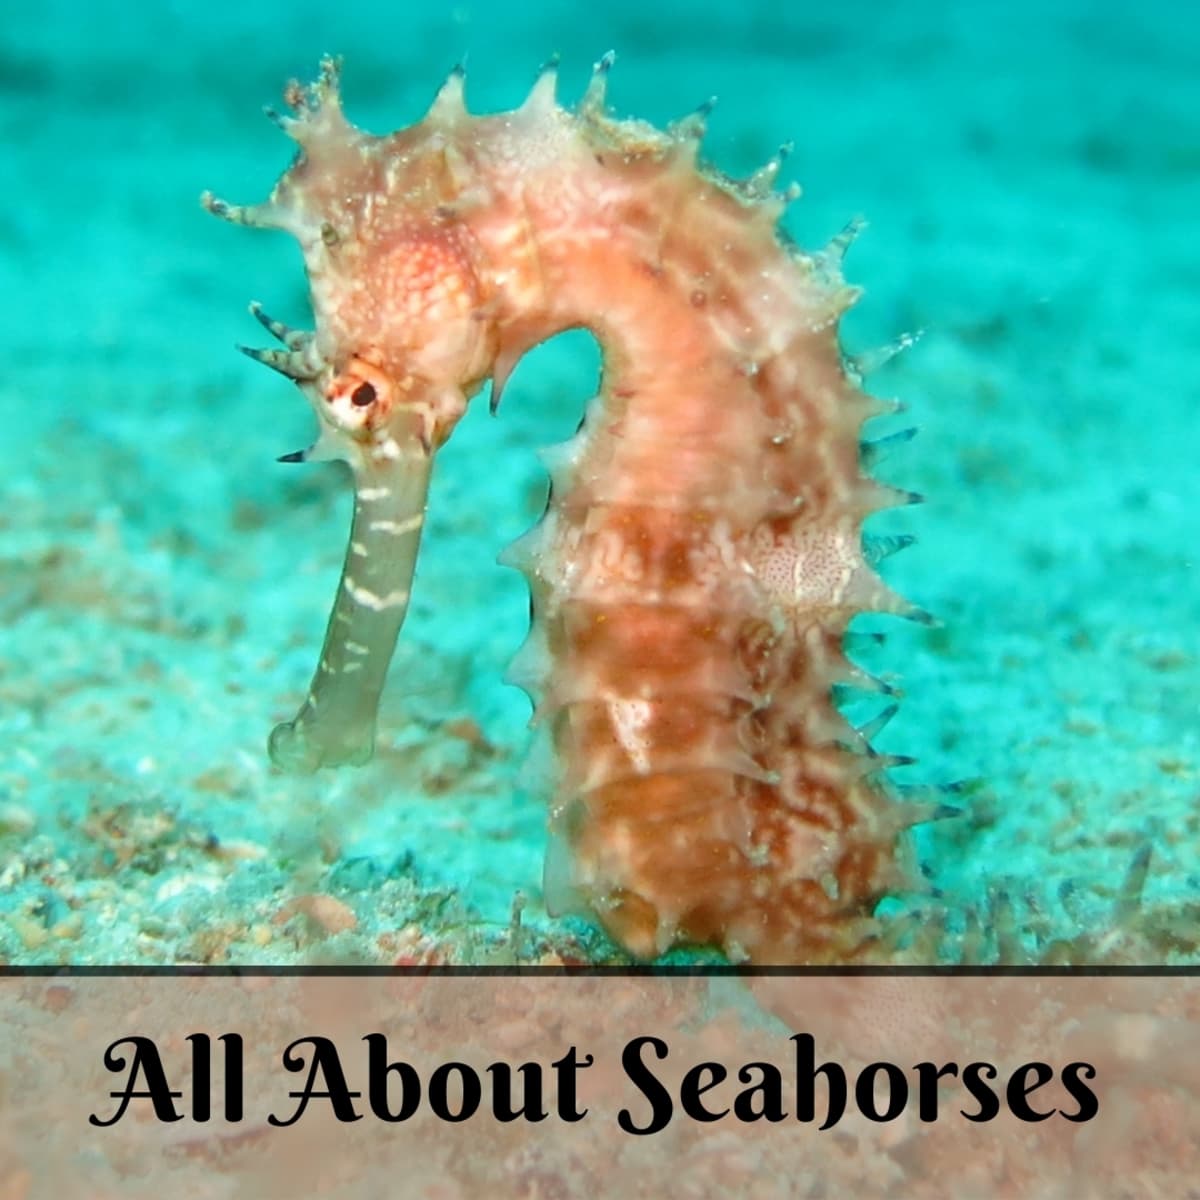 Facts About Seahorses and How to Care for Them - PetHelpful